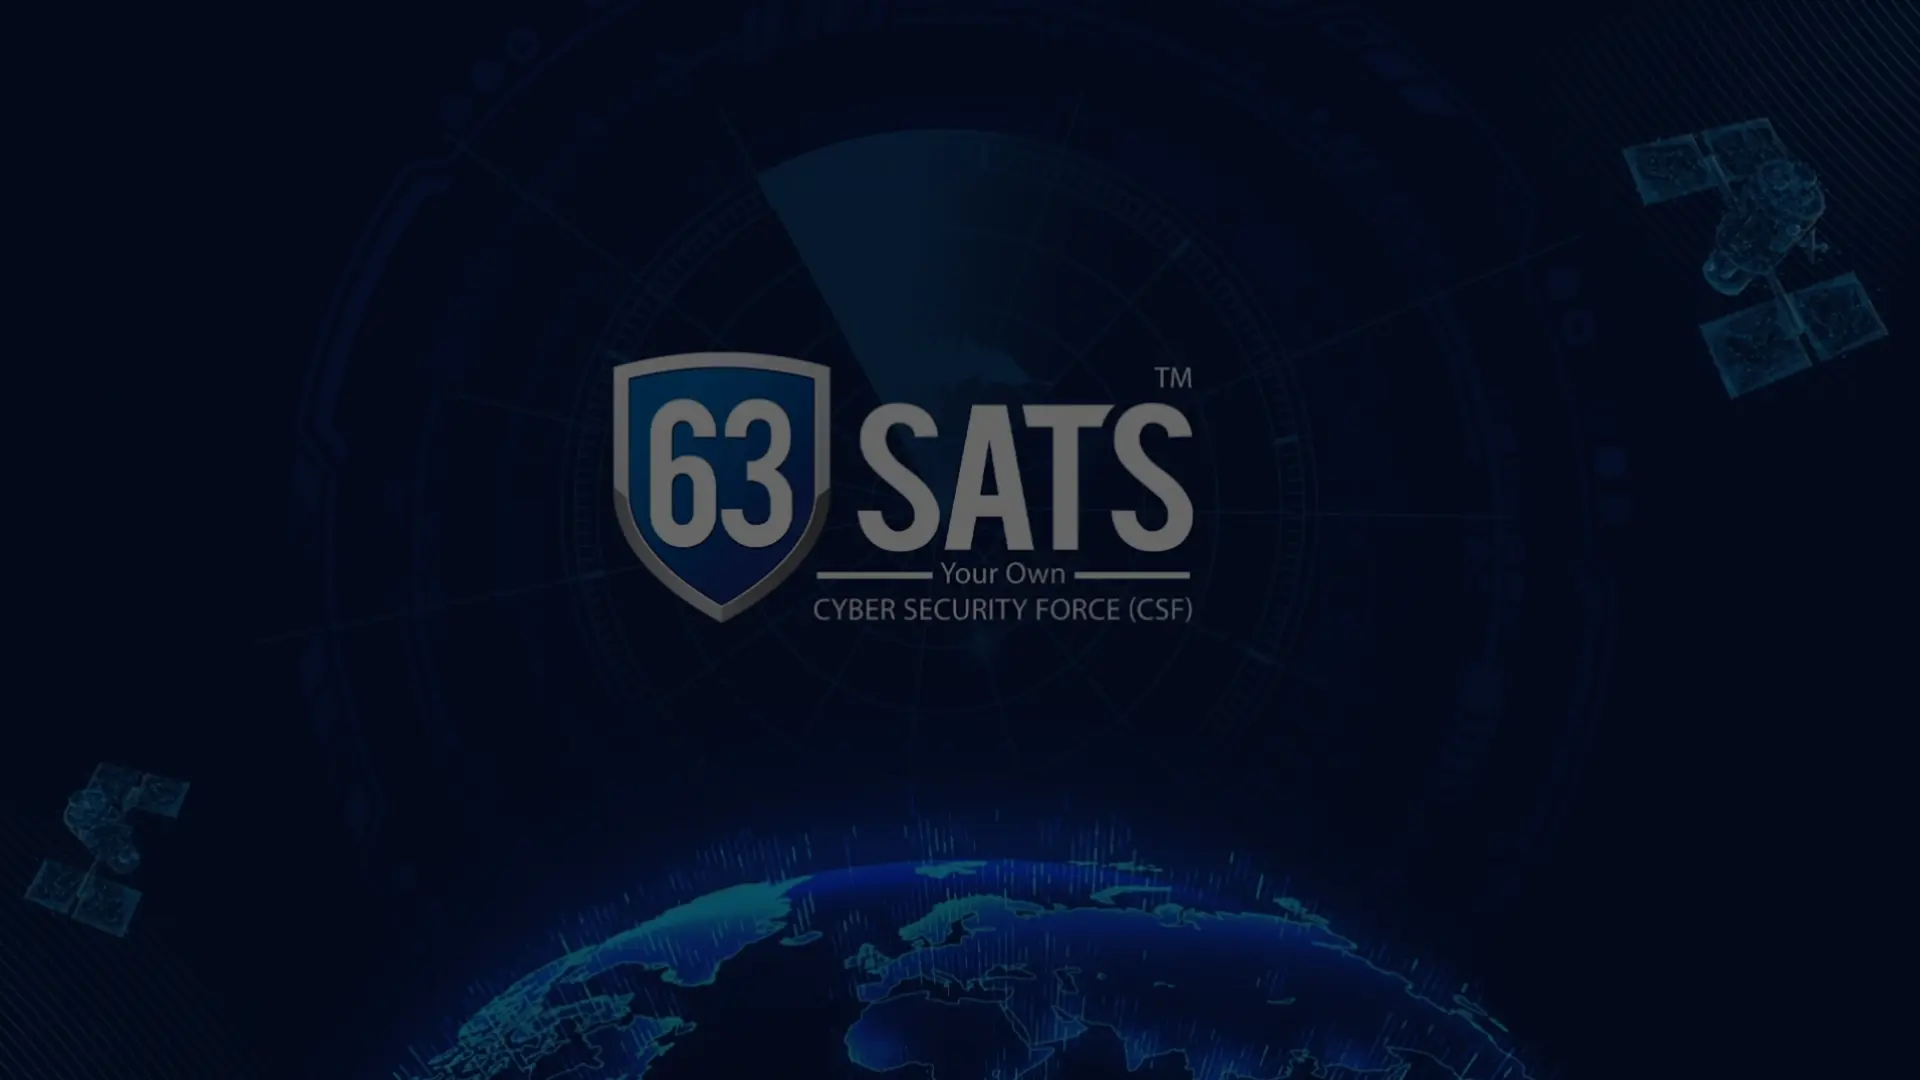 63 SATS Brand Video 2 63 Sats Cybersecurity India